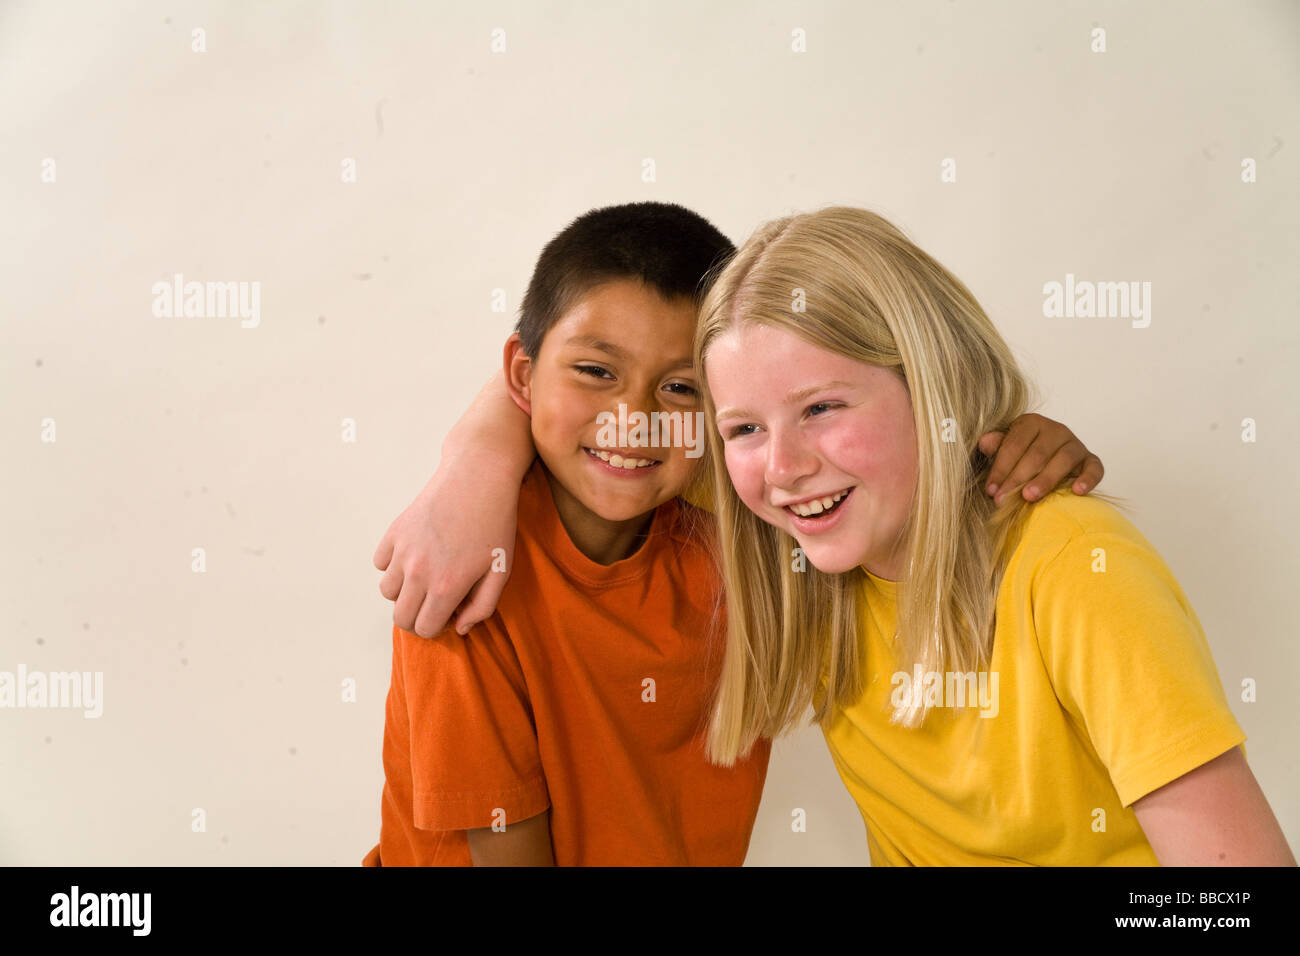 Having fun Multi ethnic racial Ethnically diverse Portrait of young Caucasian girl adopted Mexican Hispanic brother 7-11 year old olds United States Stock Photo